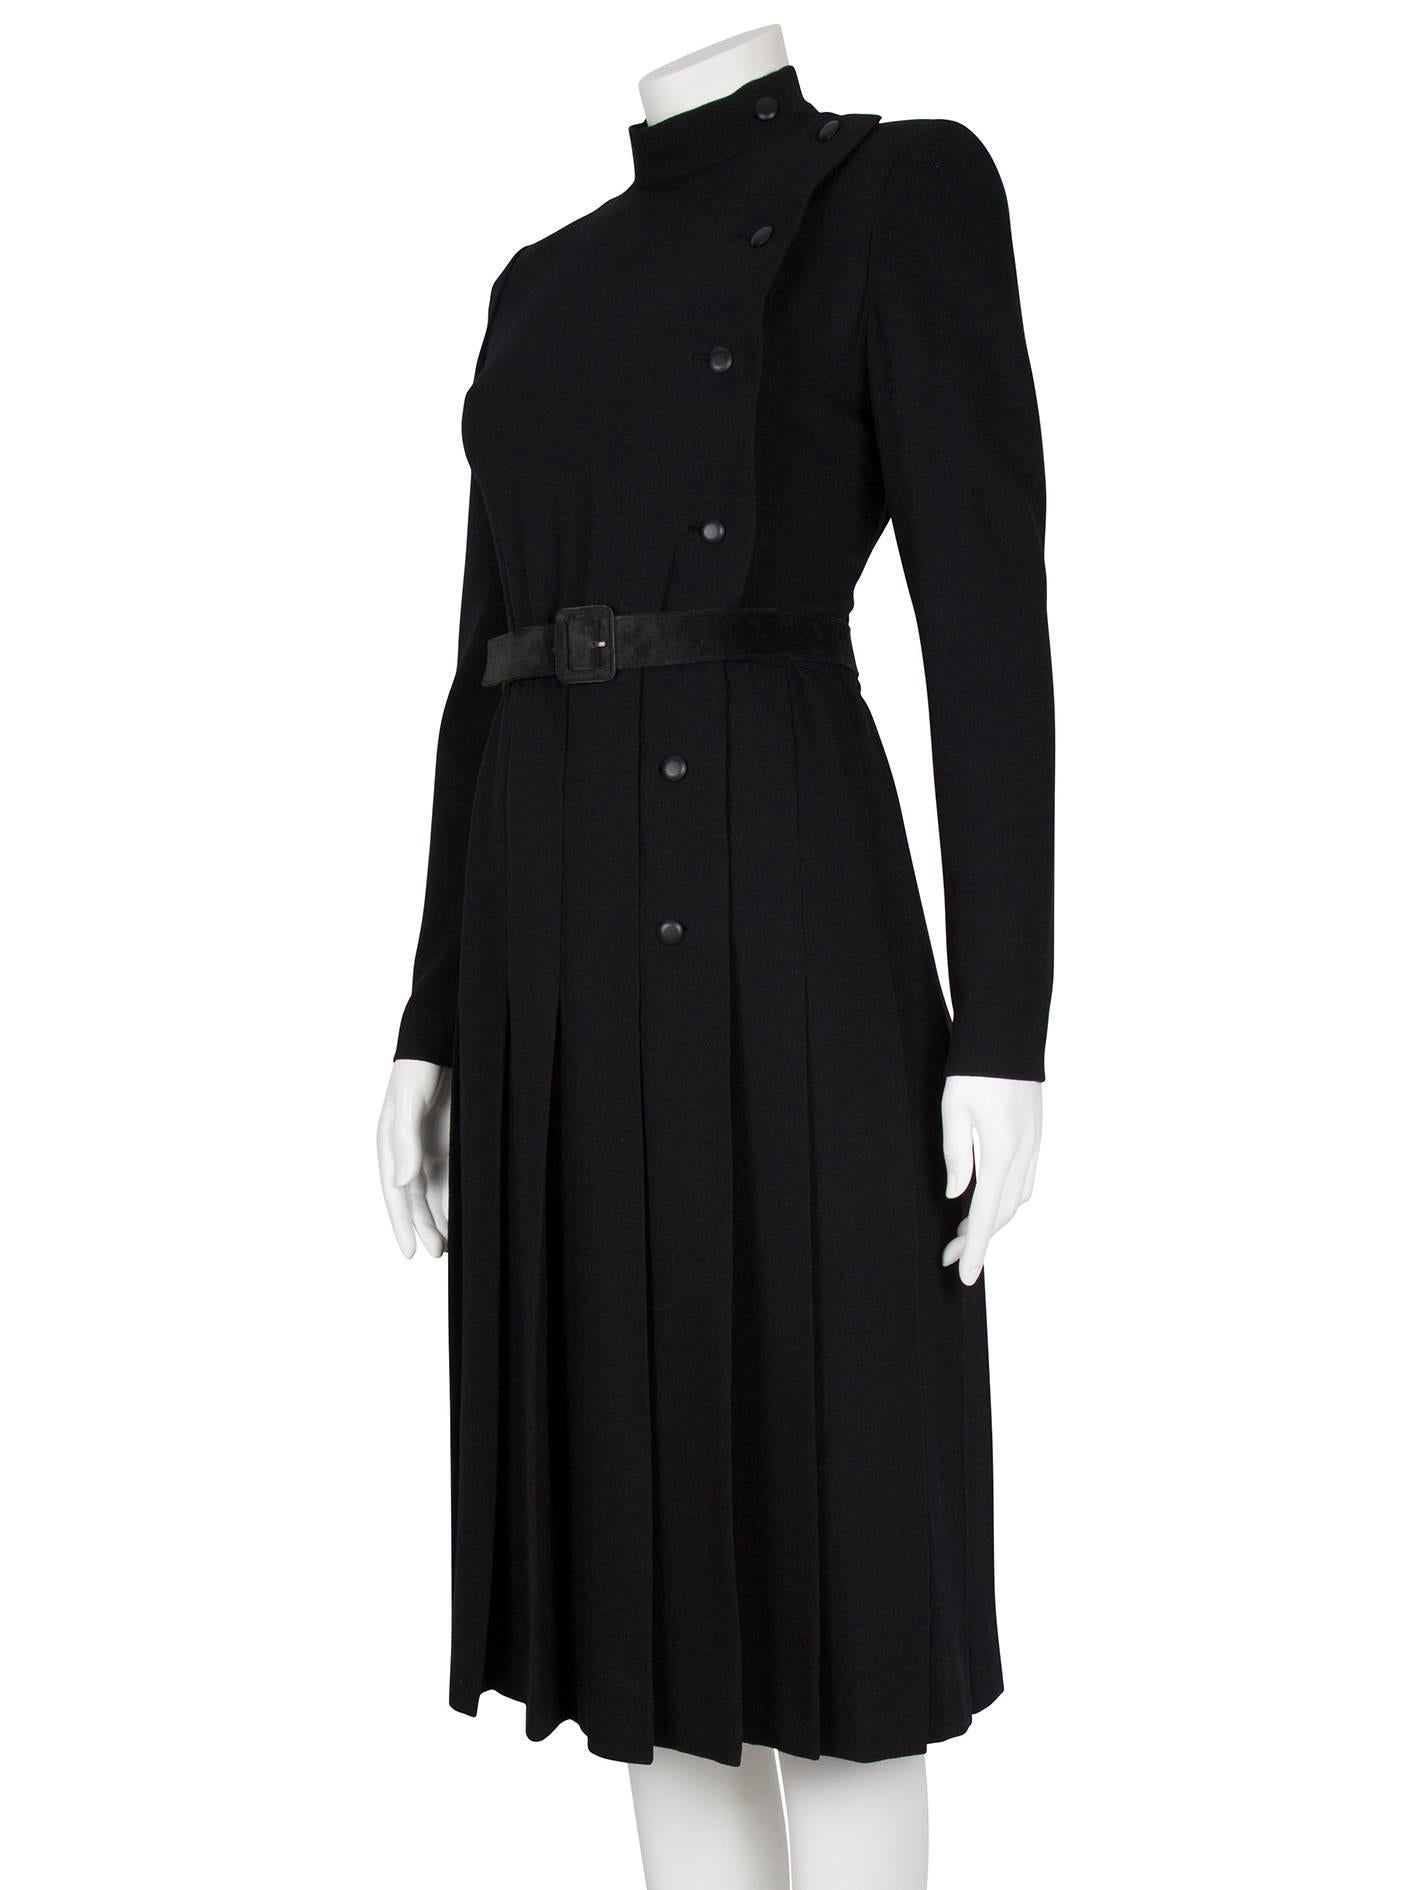 Women's A/W 1979 Dior Couture Black Silk Crepe Button-Down Wrap Dress with Suede Belt For Sale